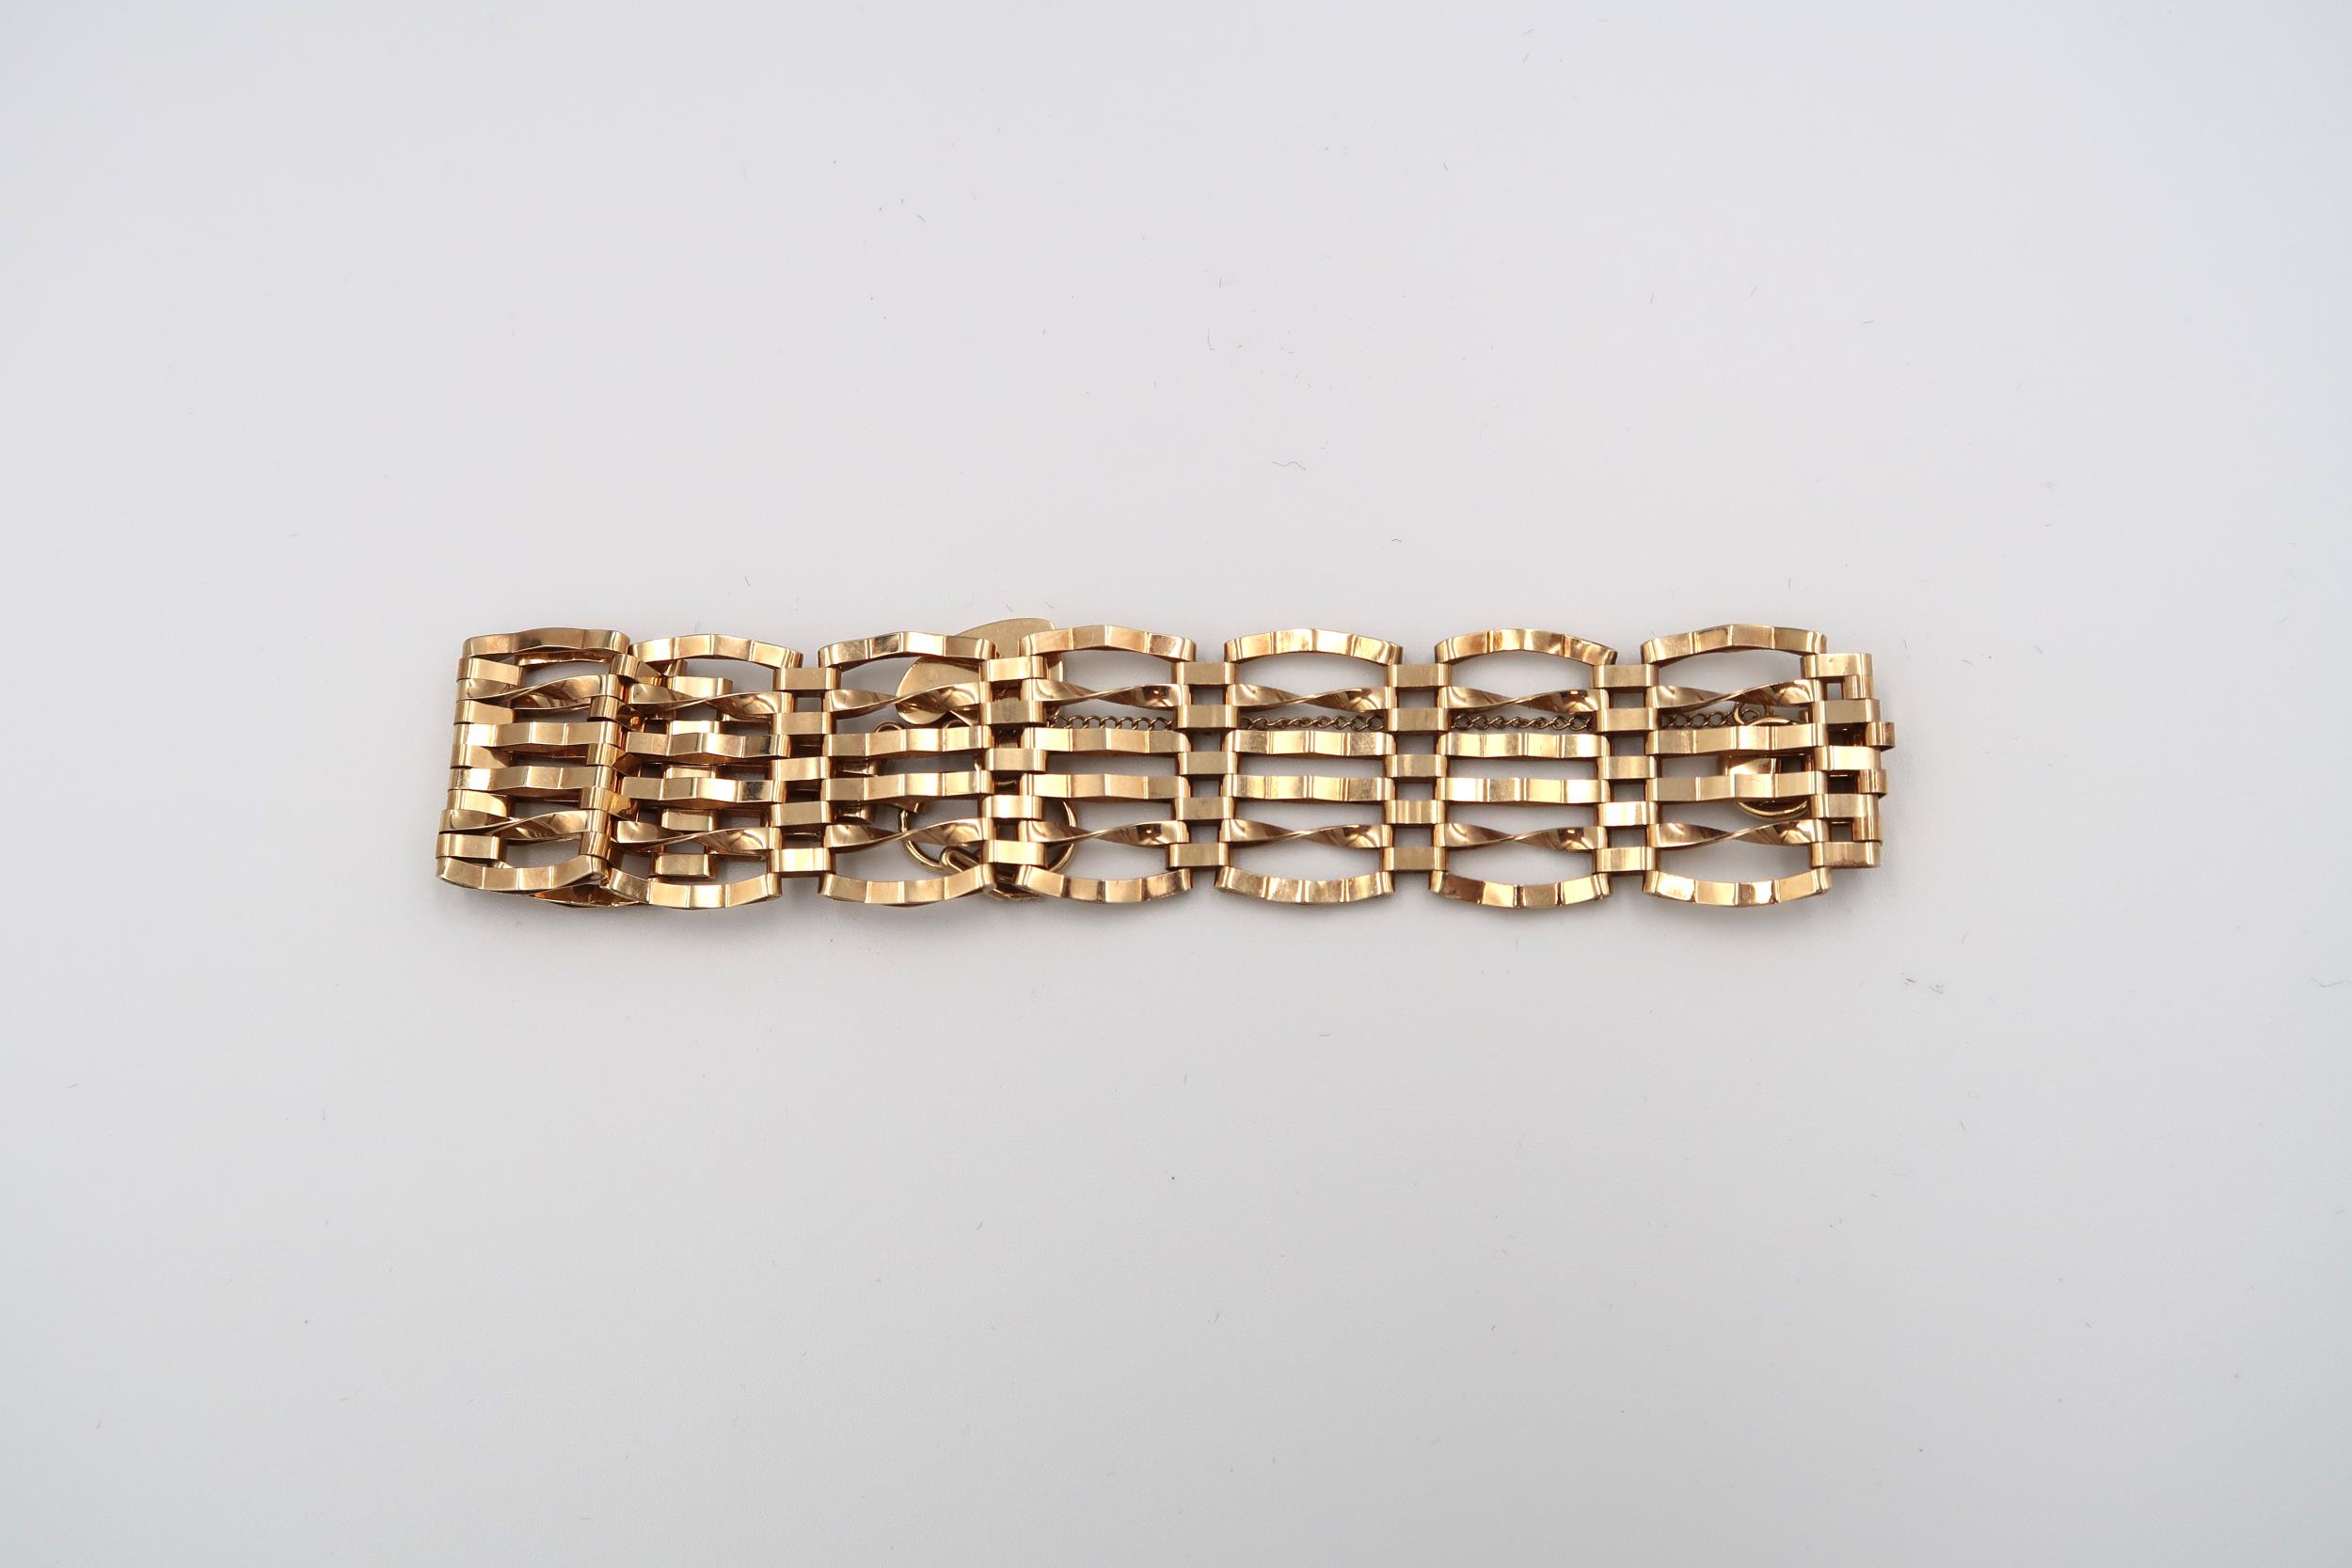 A 9ct gold articulated bracelet with heart lock - approx weight 13.31 grams